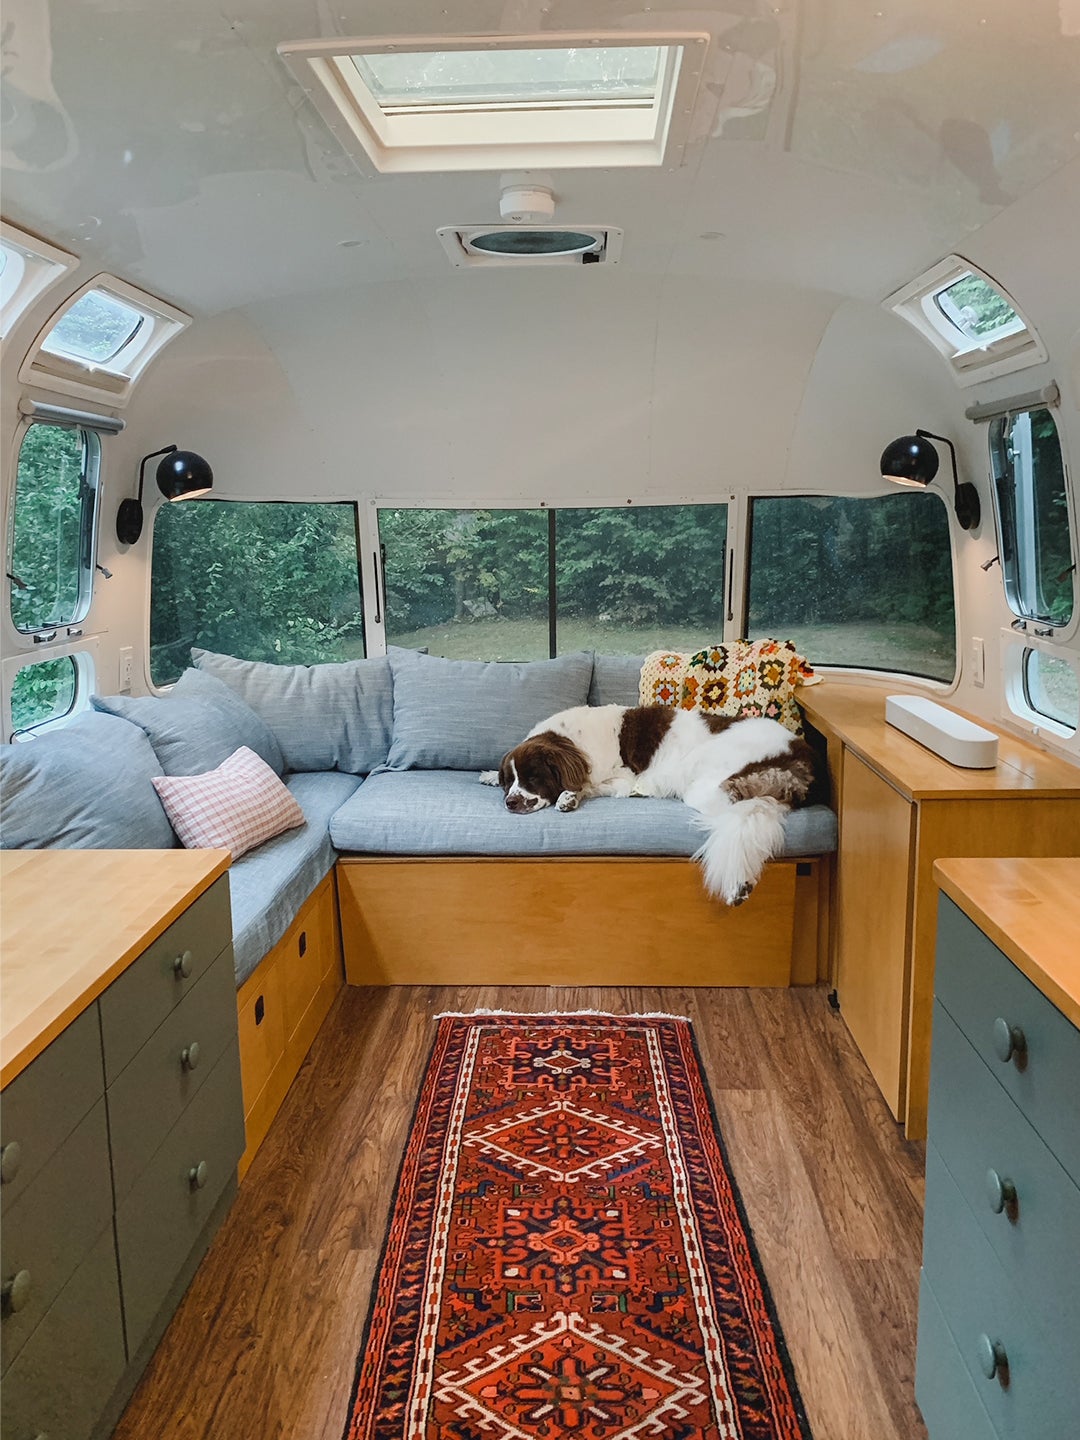 A Powder Blue Banquette and Green Cabinetry Prove That Caravans Can Still Be Stylish